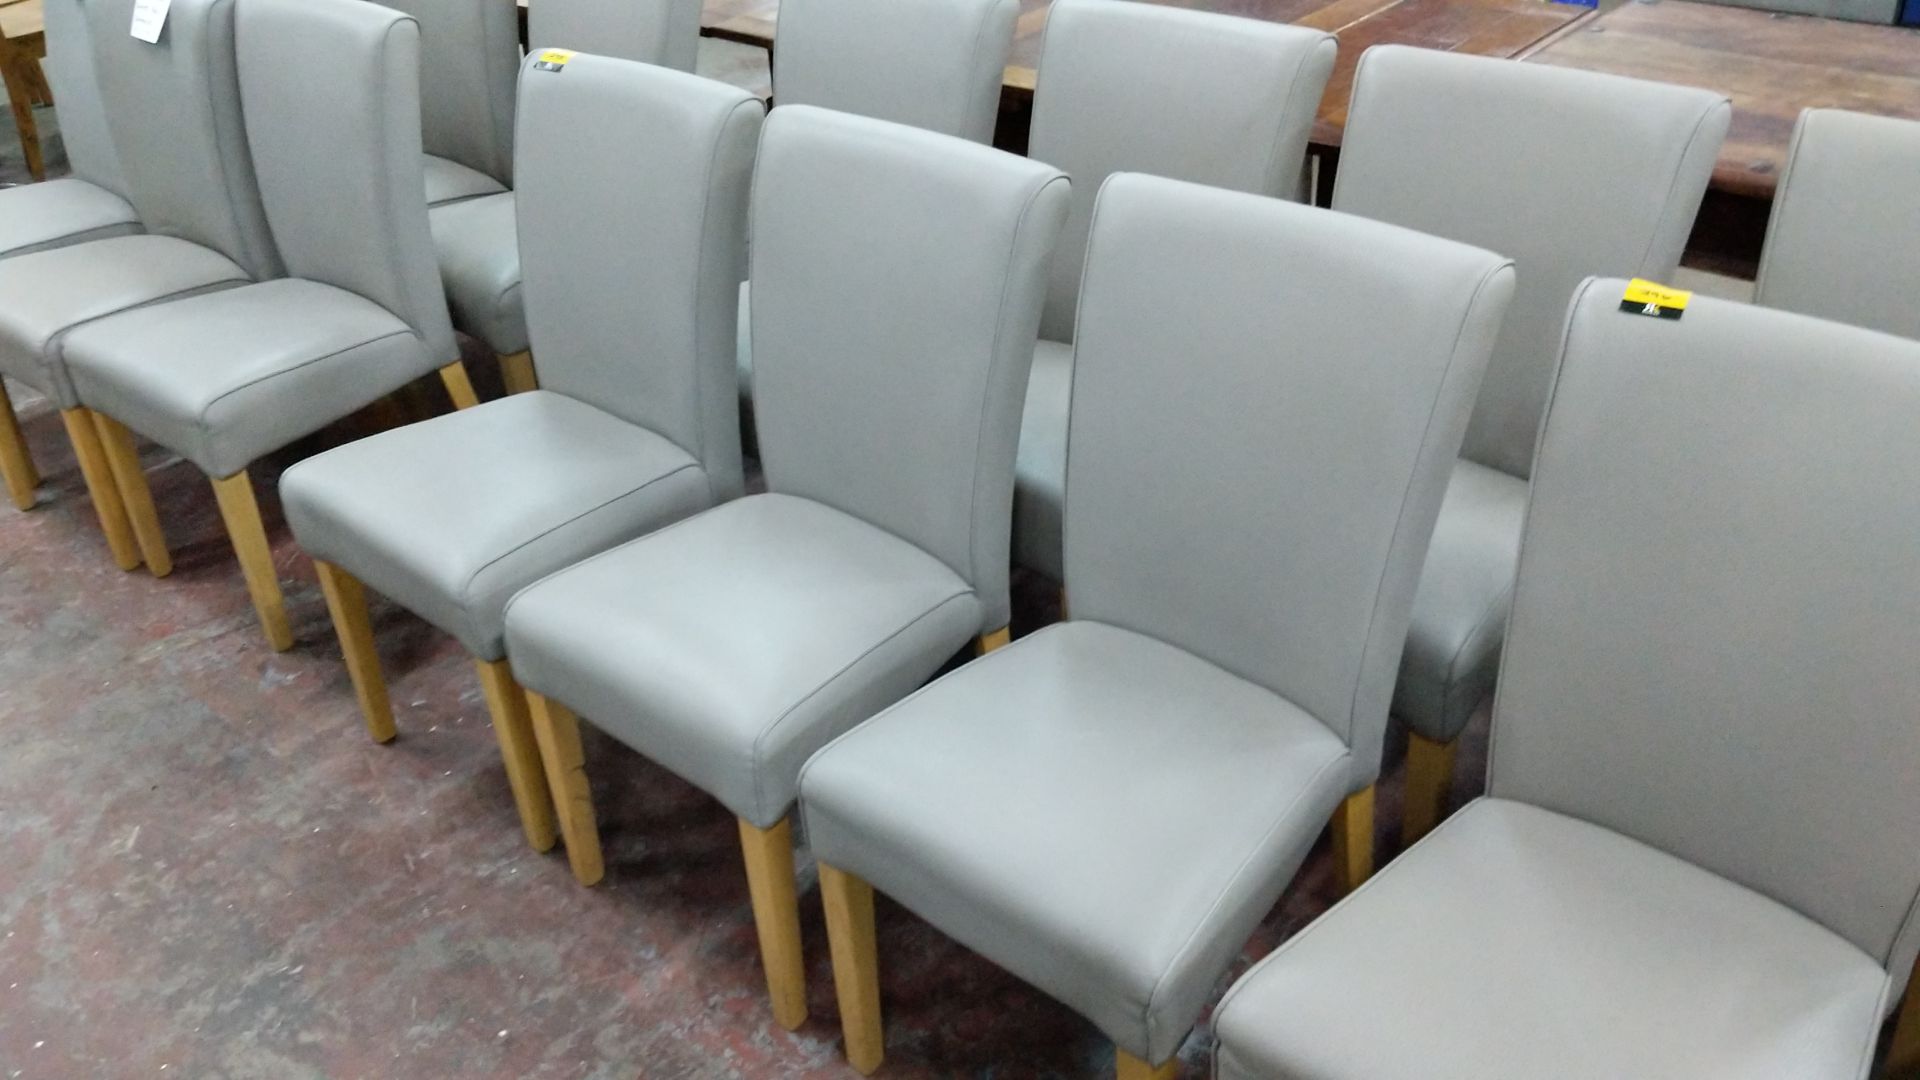 6 off dining chairs with wooden legs, upholstered in taupe leatherette type fabric, understood to - Image 4 of 6